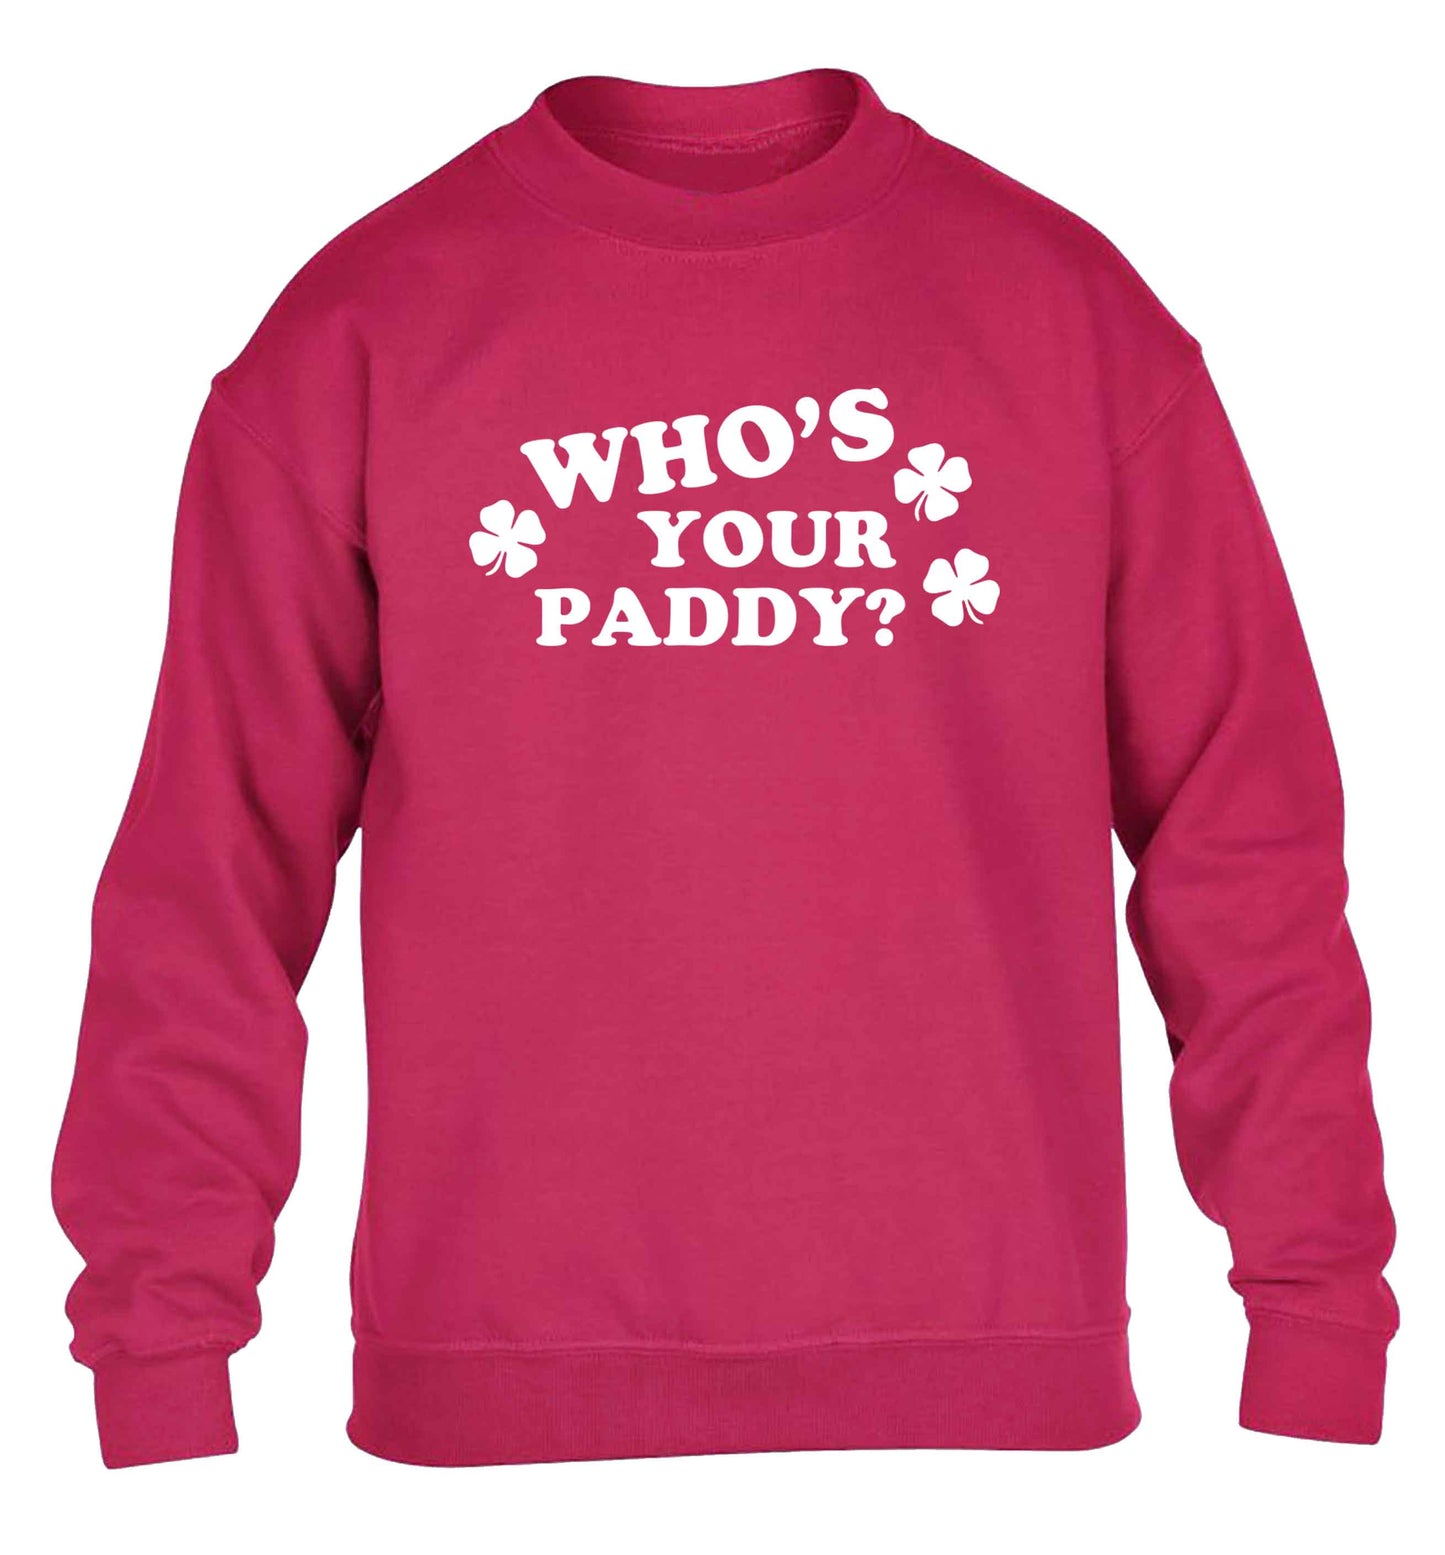 Who's your paddy? children's pink sweater 12-13 Years